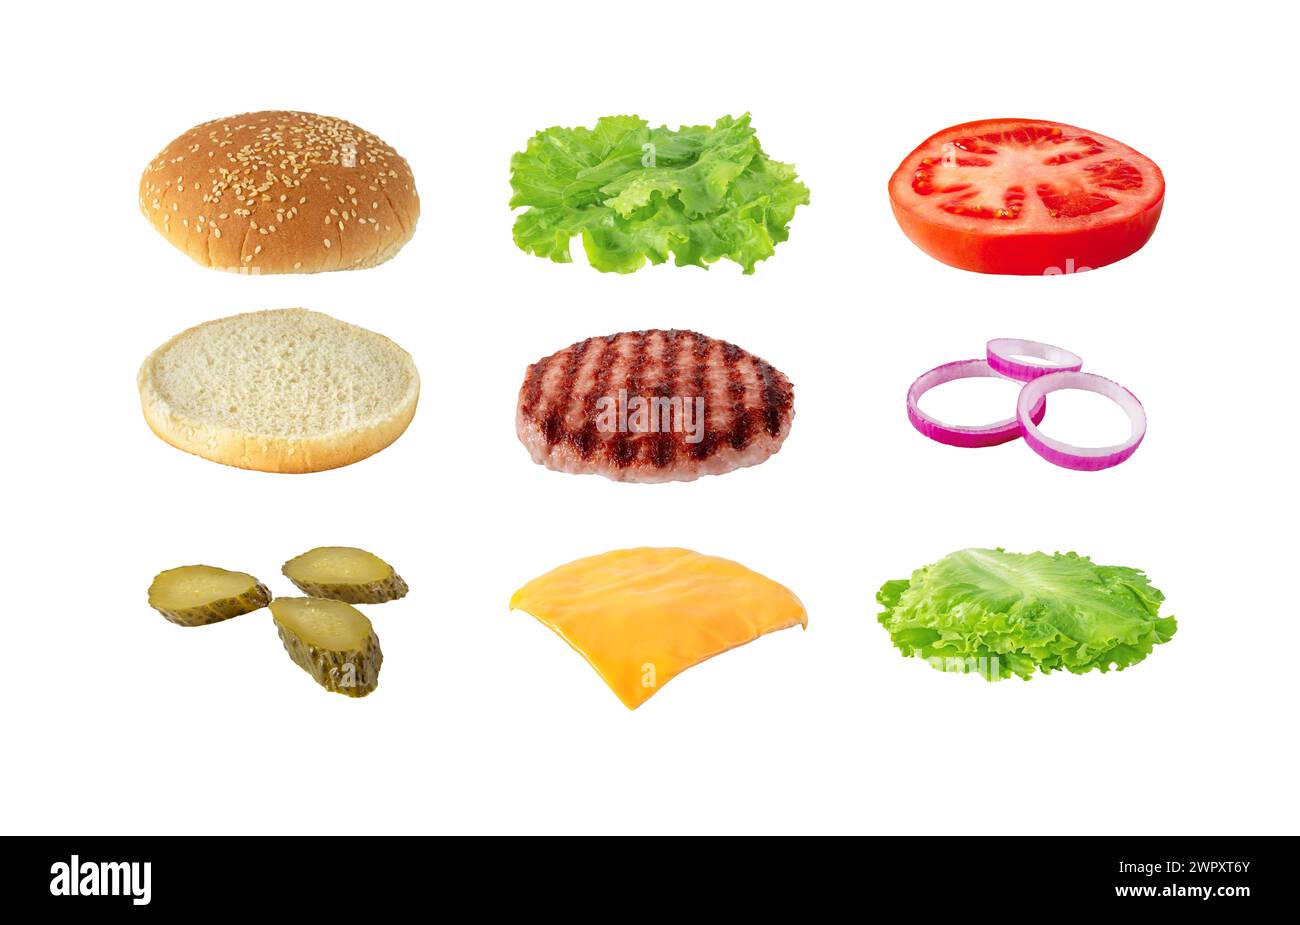 Tasty colorful sandwich ingredients isolated on white. Hamburger with patty of ground beef meat, cheese, lettuce, tomato, onion,  pickles and bun with Stock Photo